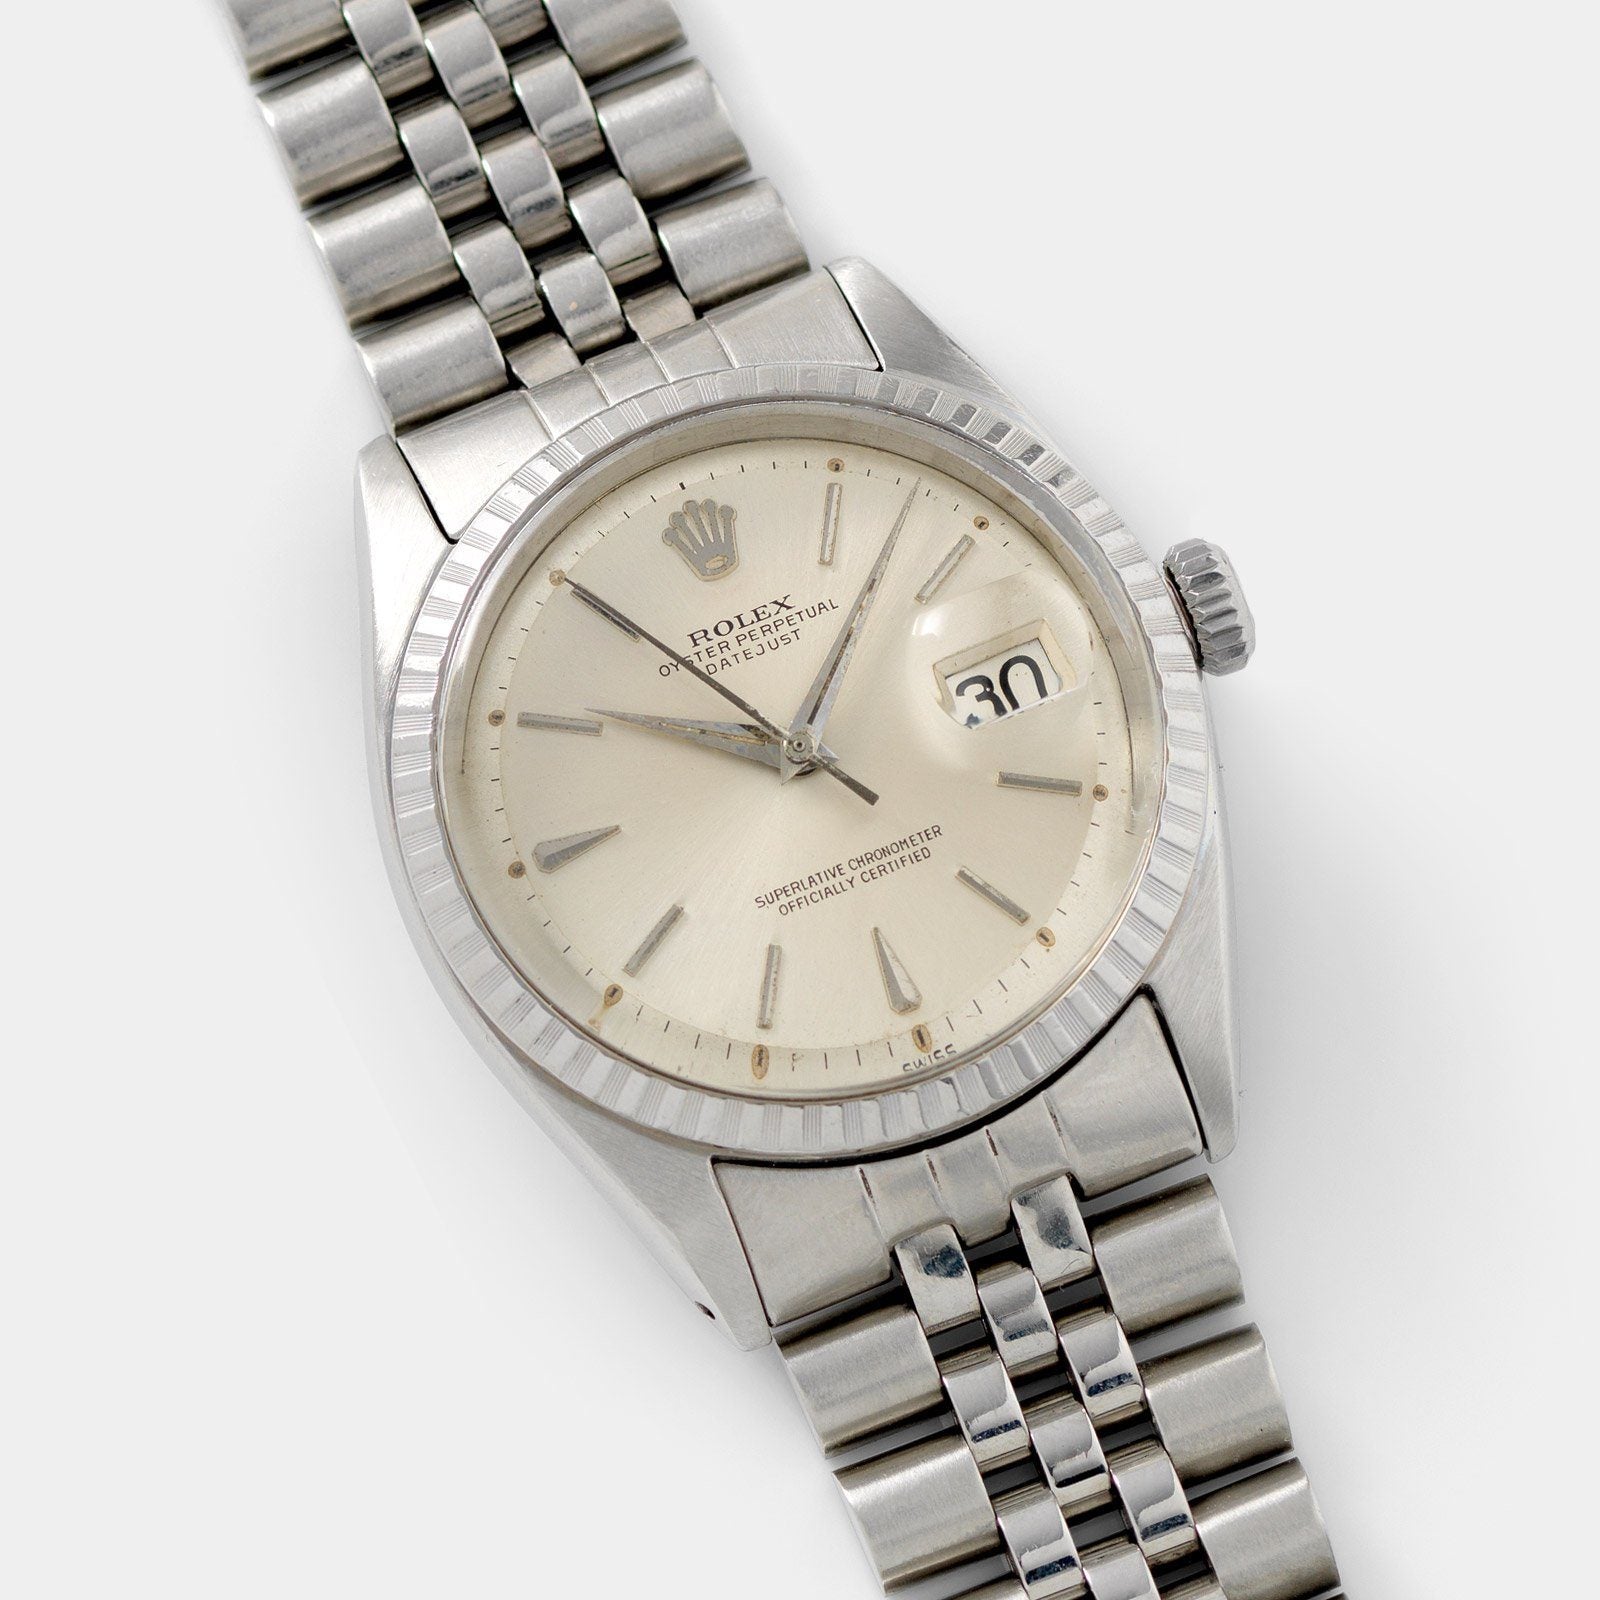 Rolex Datejust Silver Swiss Only Dial 1603 with fluted bezel